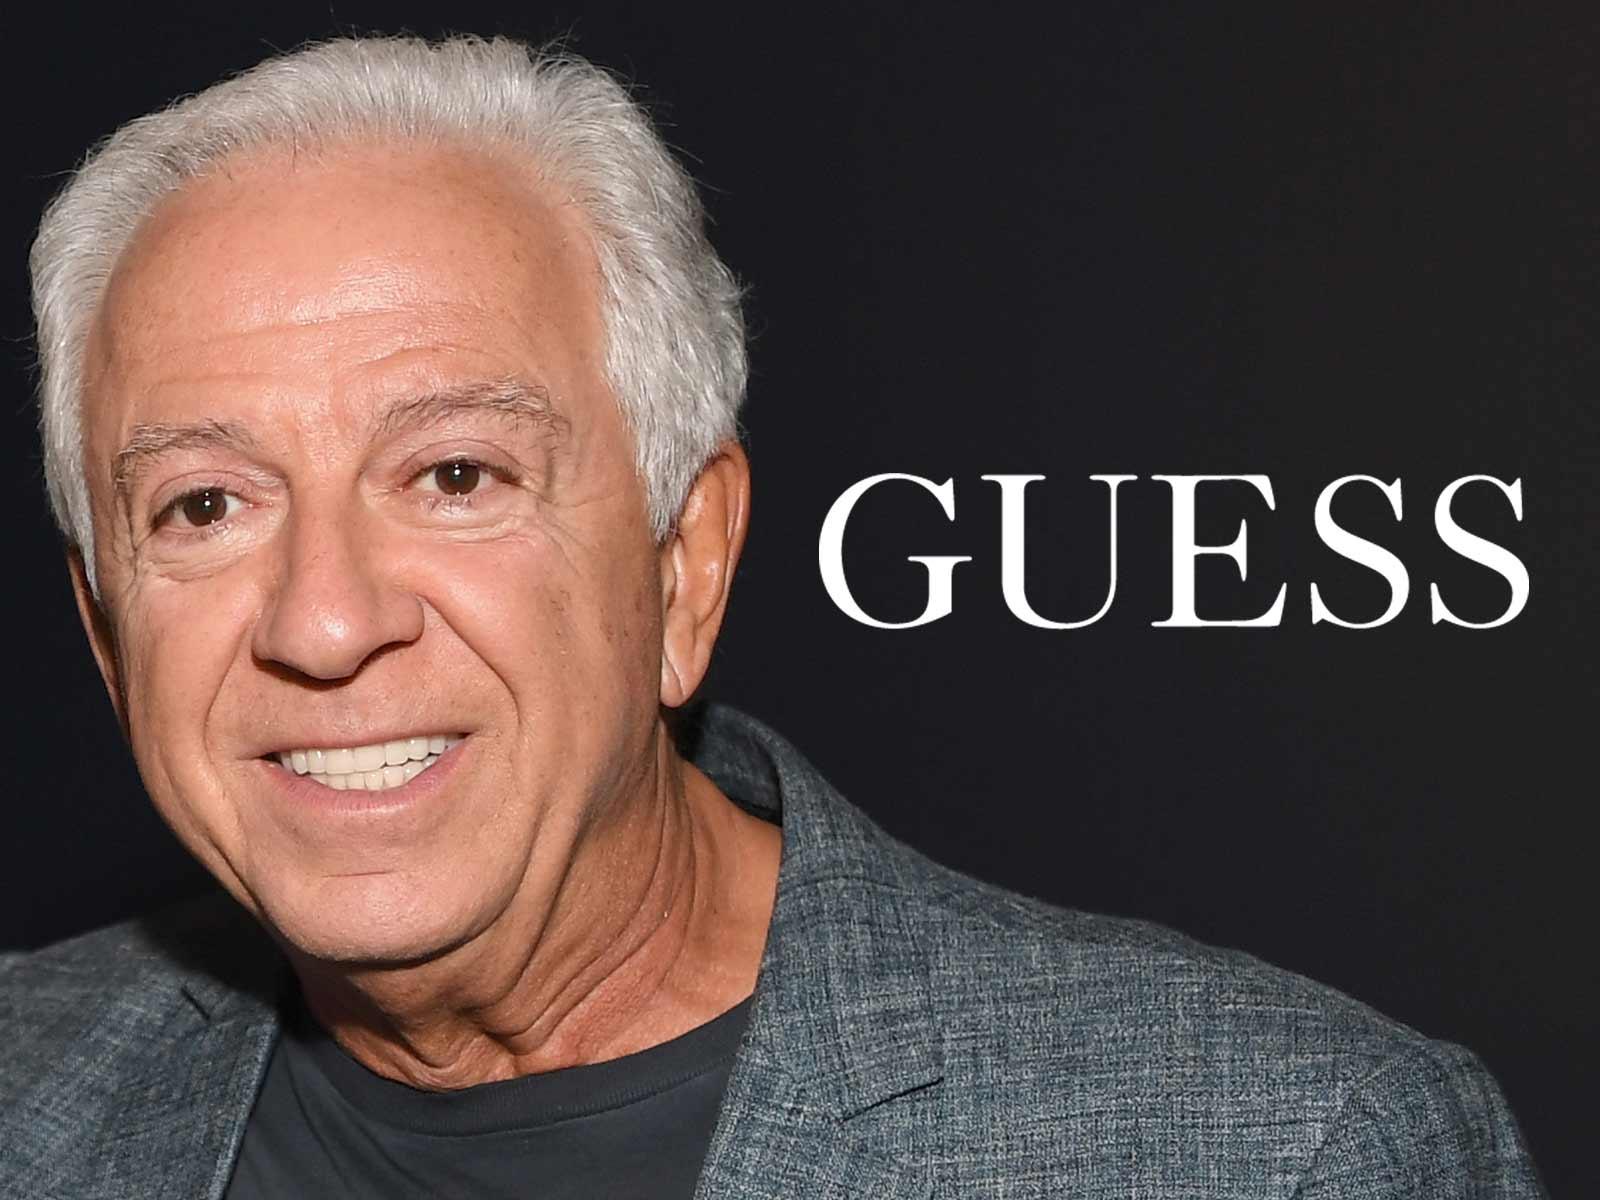 Paul Marciano and Guess Pay $500,000 to Accusers, Marciano Resigns from Company Board